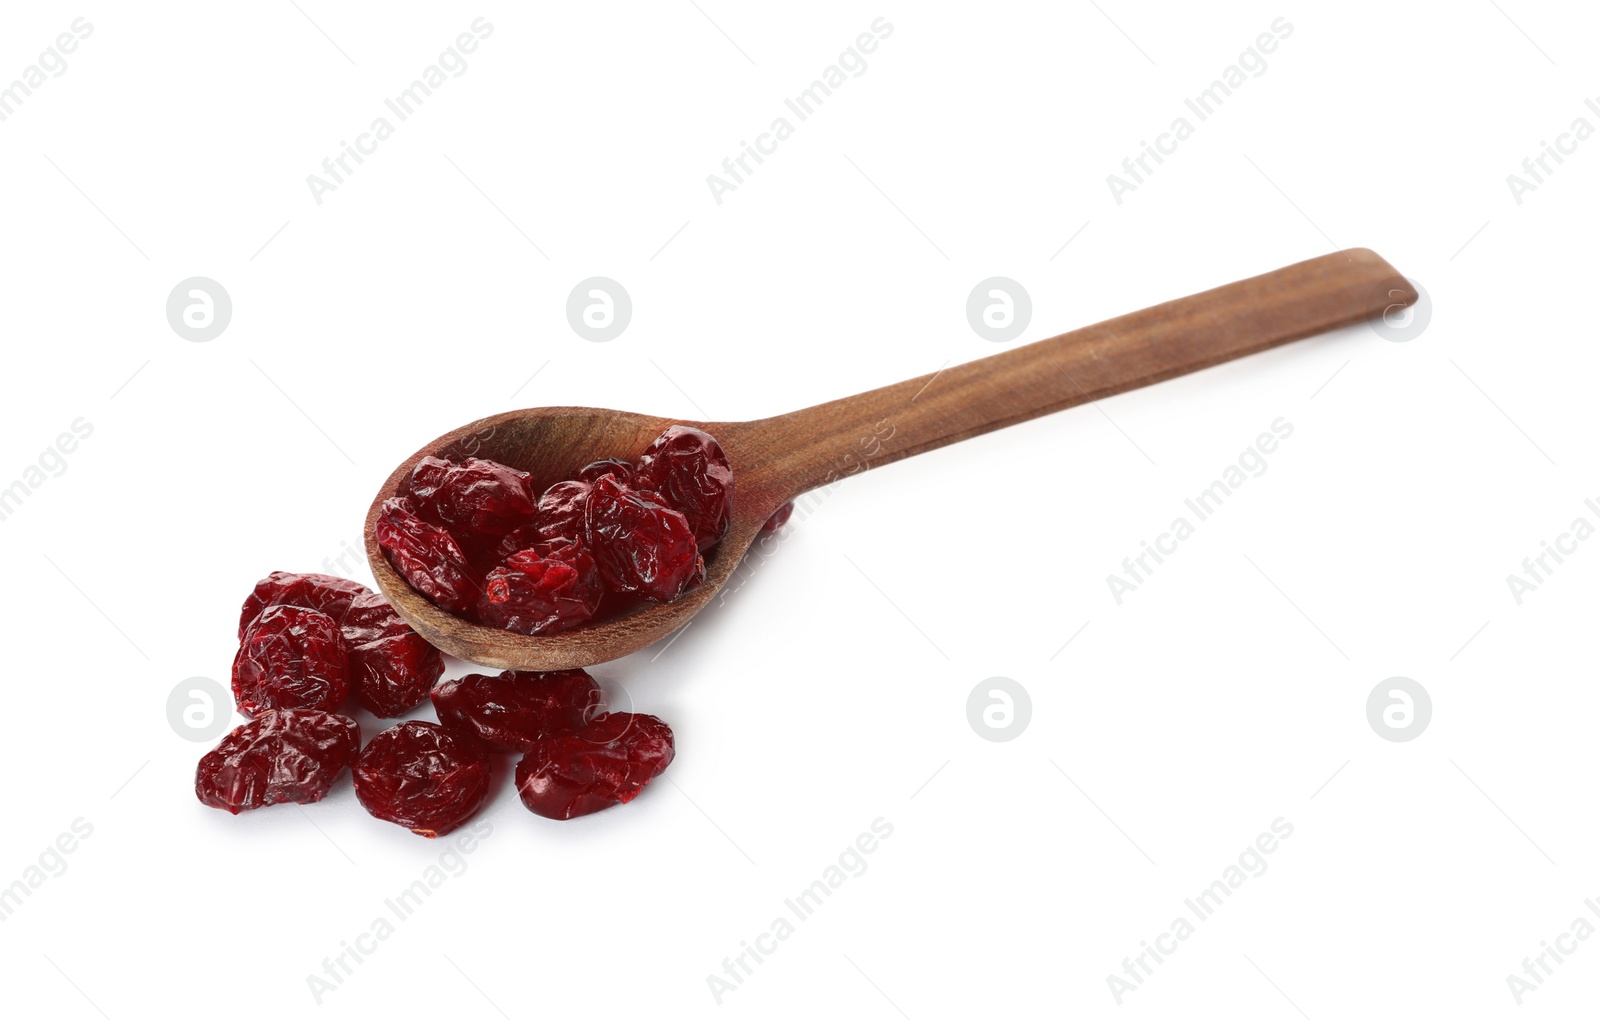 Photo of Dried cranberries and wooden spoon on white background